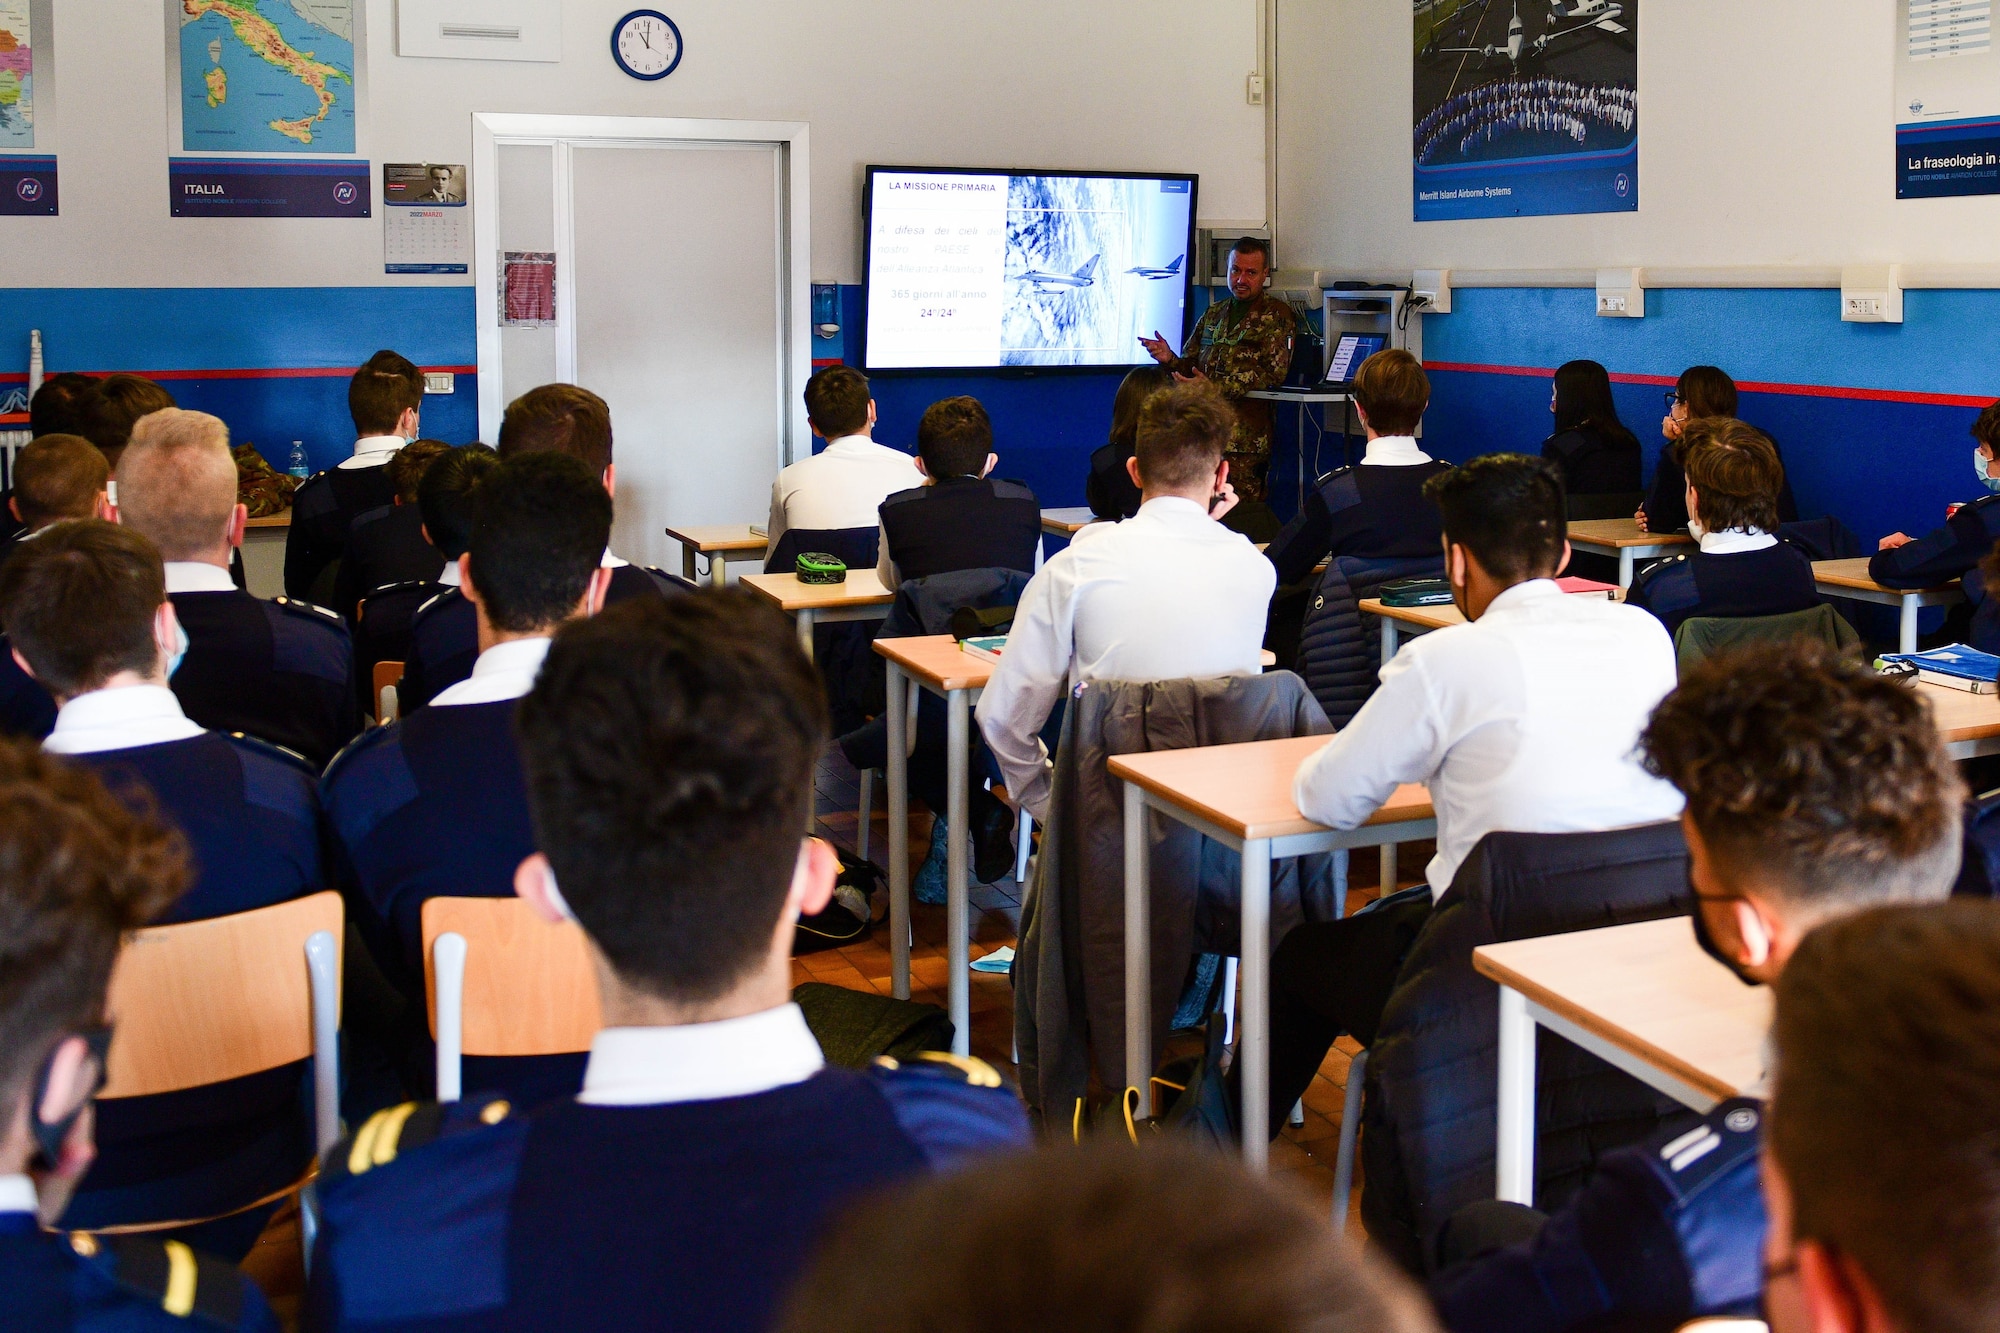 The Italian air force Air Traffic Control Tower commander speaks to a group of aeronautical high school students at the Nobile Aviation college in Udine, Italy, March 8, 2022. There are approximately 90 students in the Nobile Aviation college and the pilots and maintainer spoke on their experiences in the military. (U.S. Air Force photo by Senior Airman Brooke Moeder)